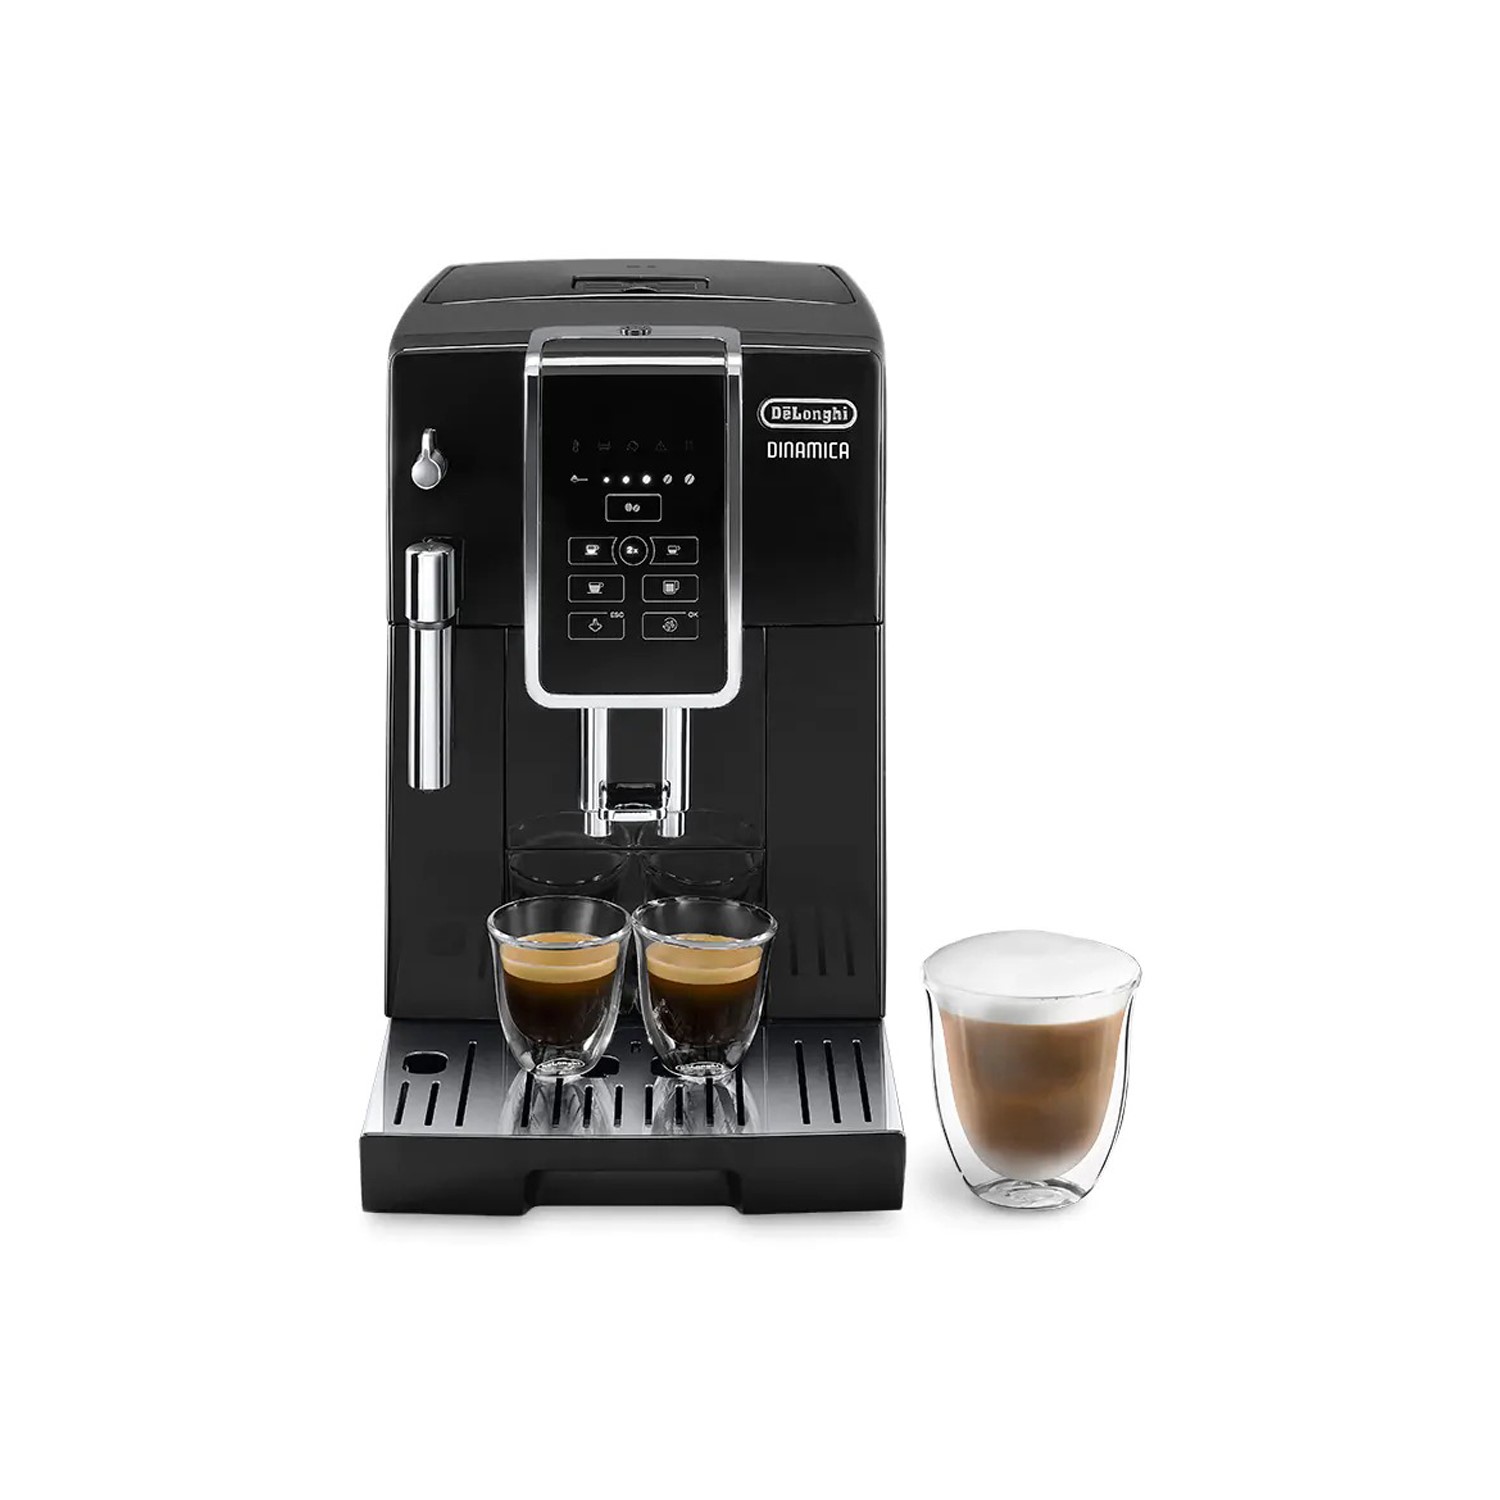 Delonghi Dinamica Automatic Bean To Cup Coffee Machine - Black